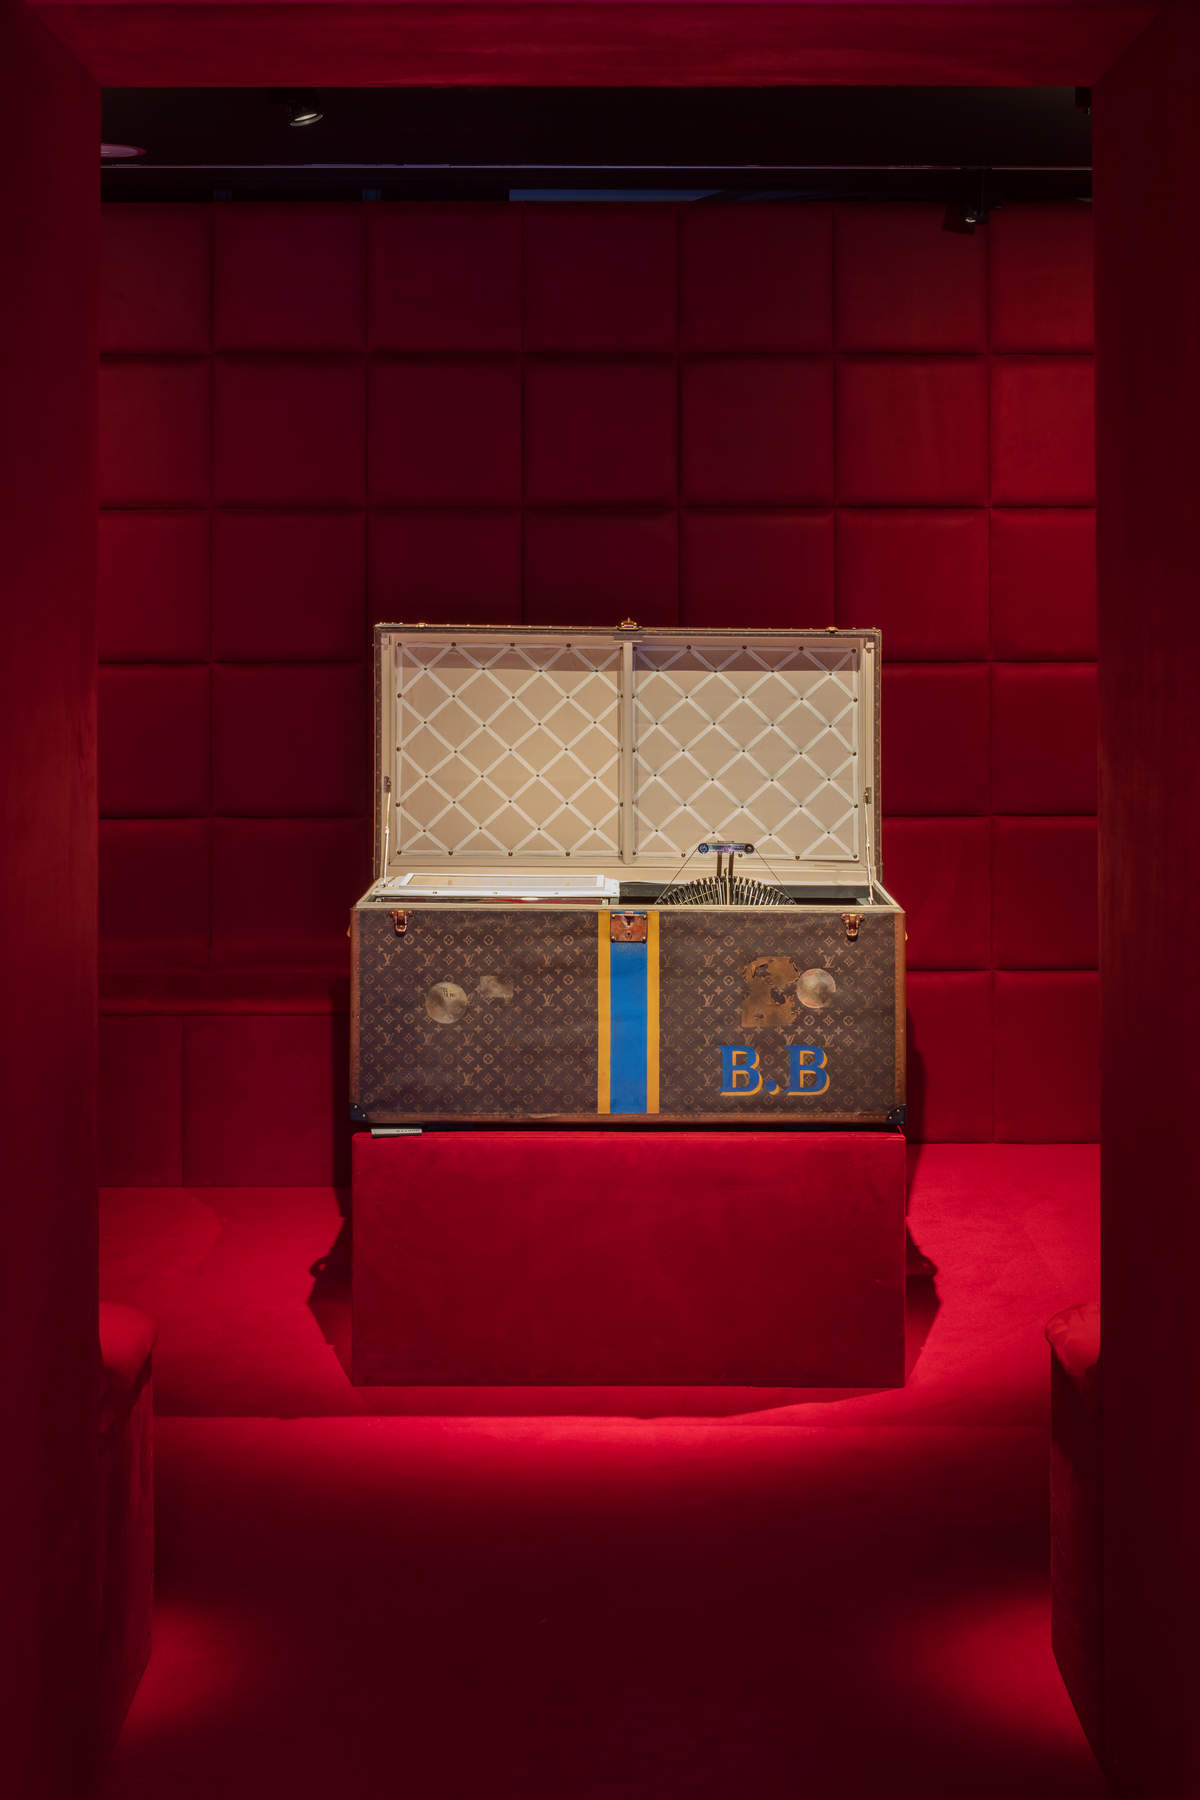 Louis Vuitton celebrates its bicentenary birthday with a global